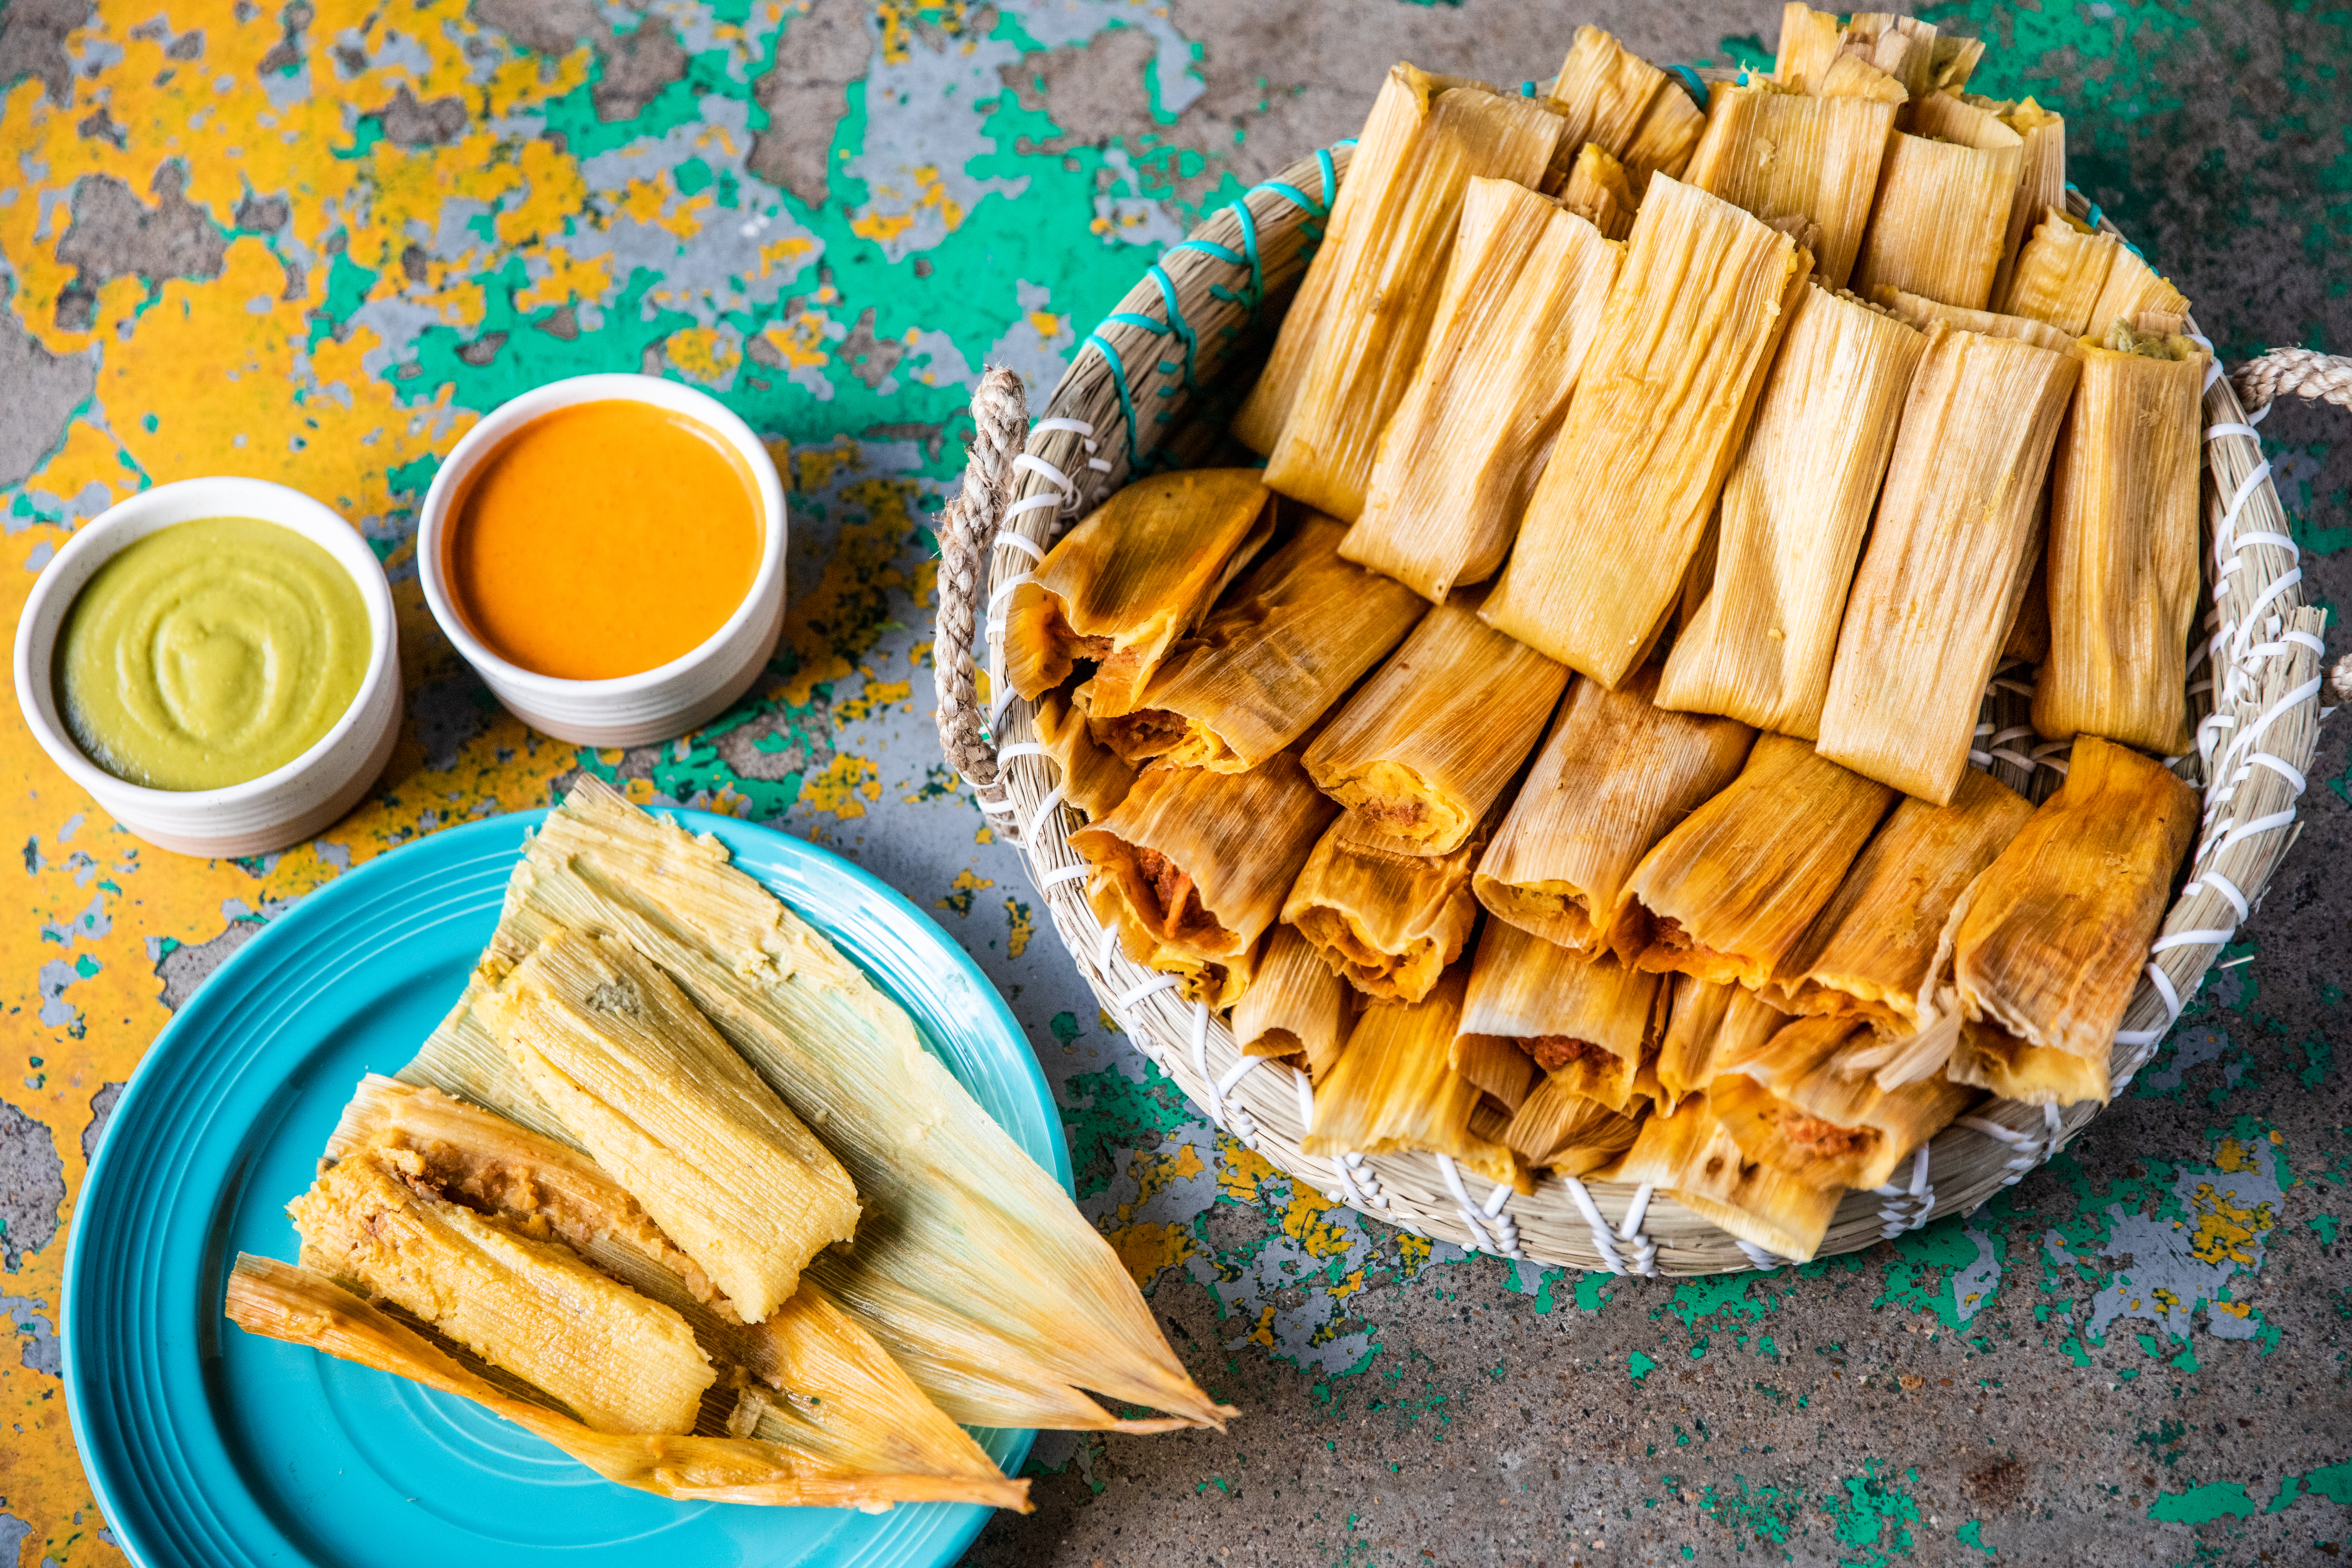 A spread of tamales with green and orange salsa.